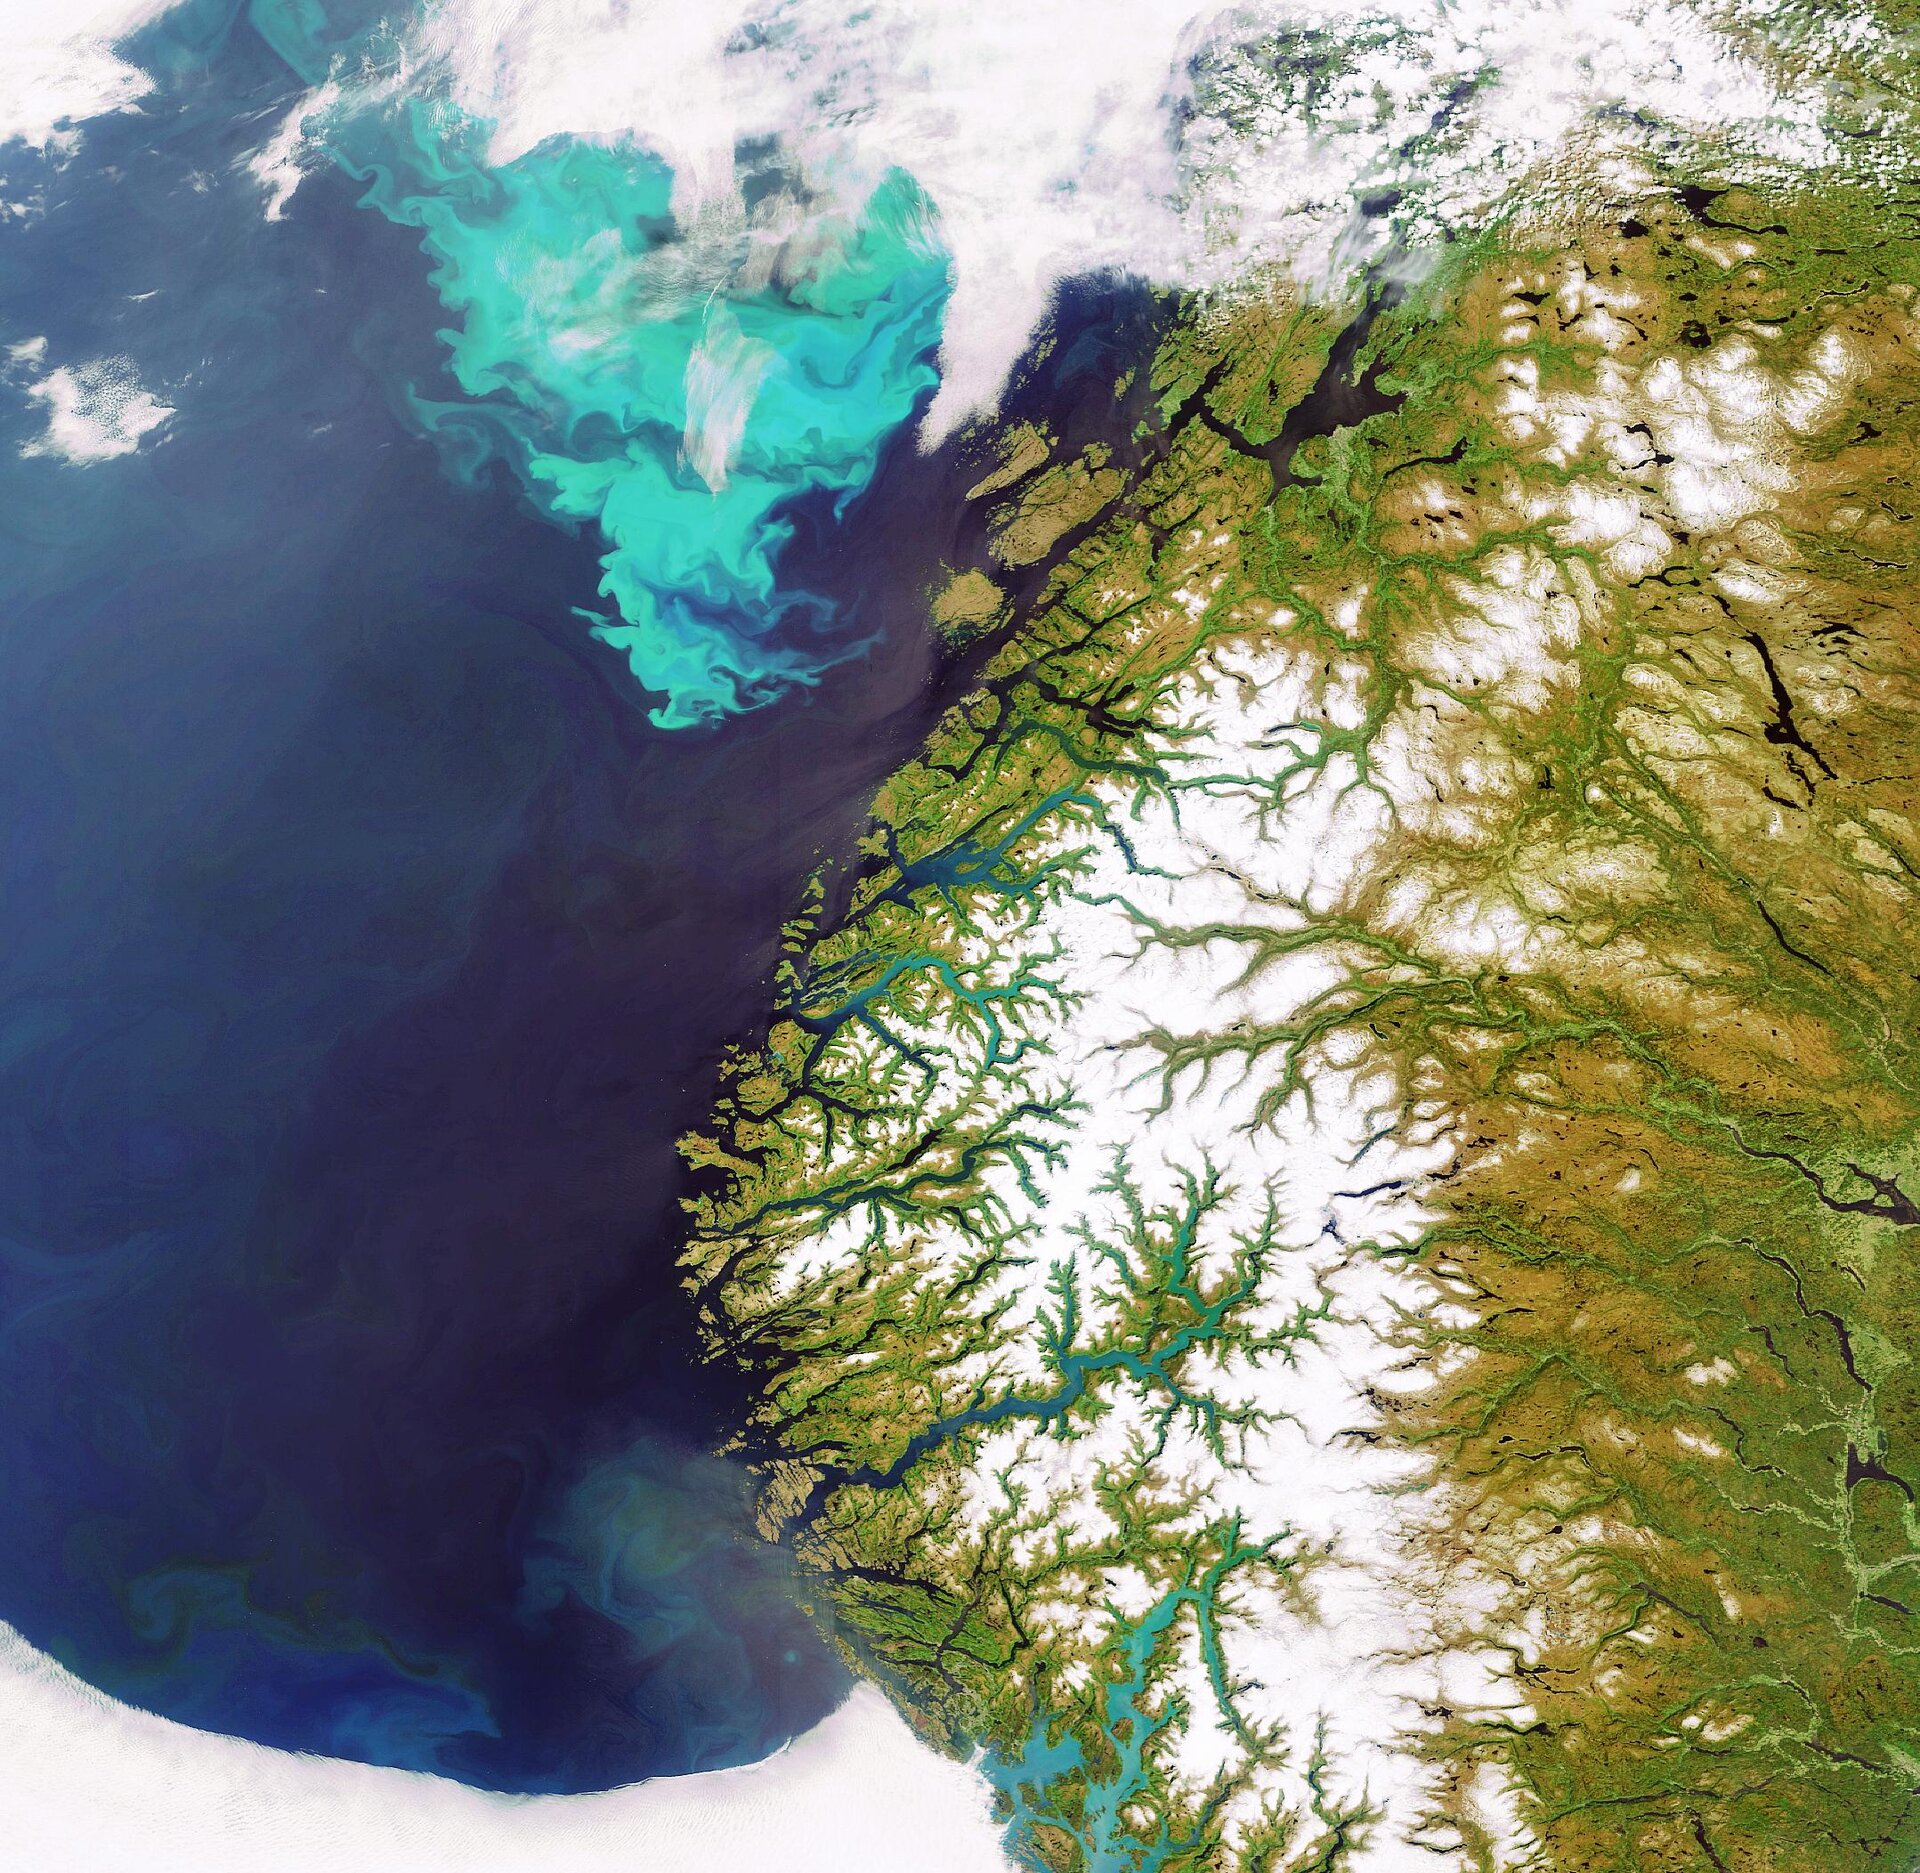 Plankton bloom off the coast of Norway